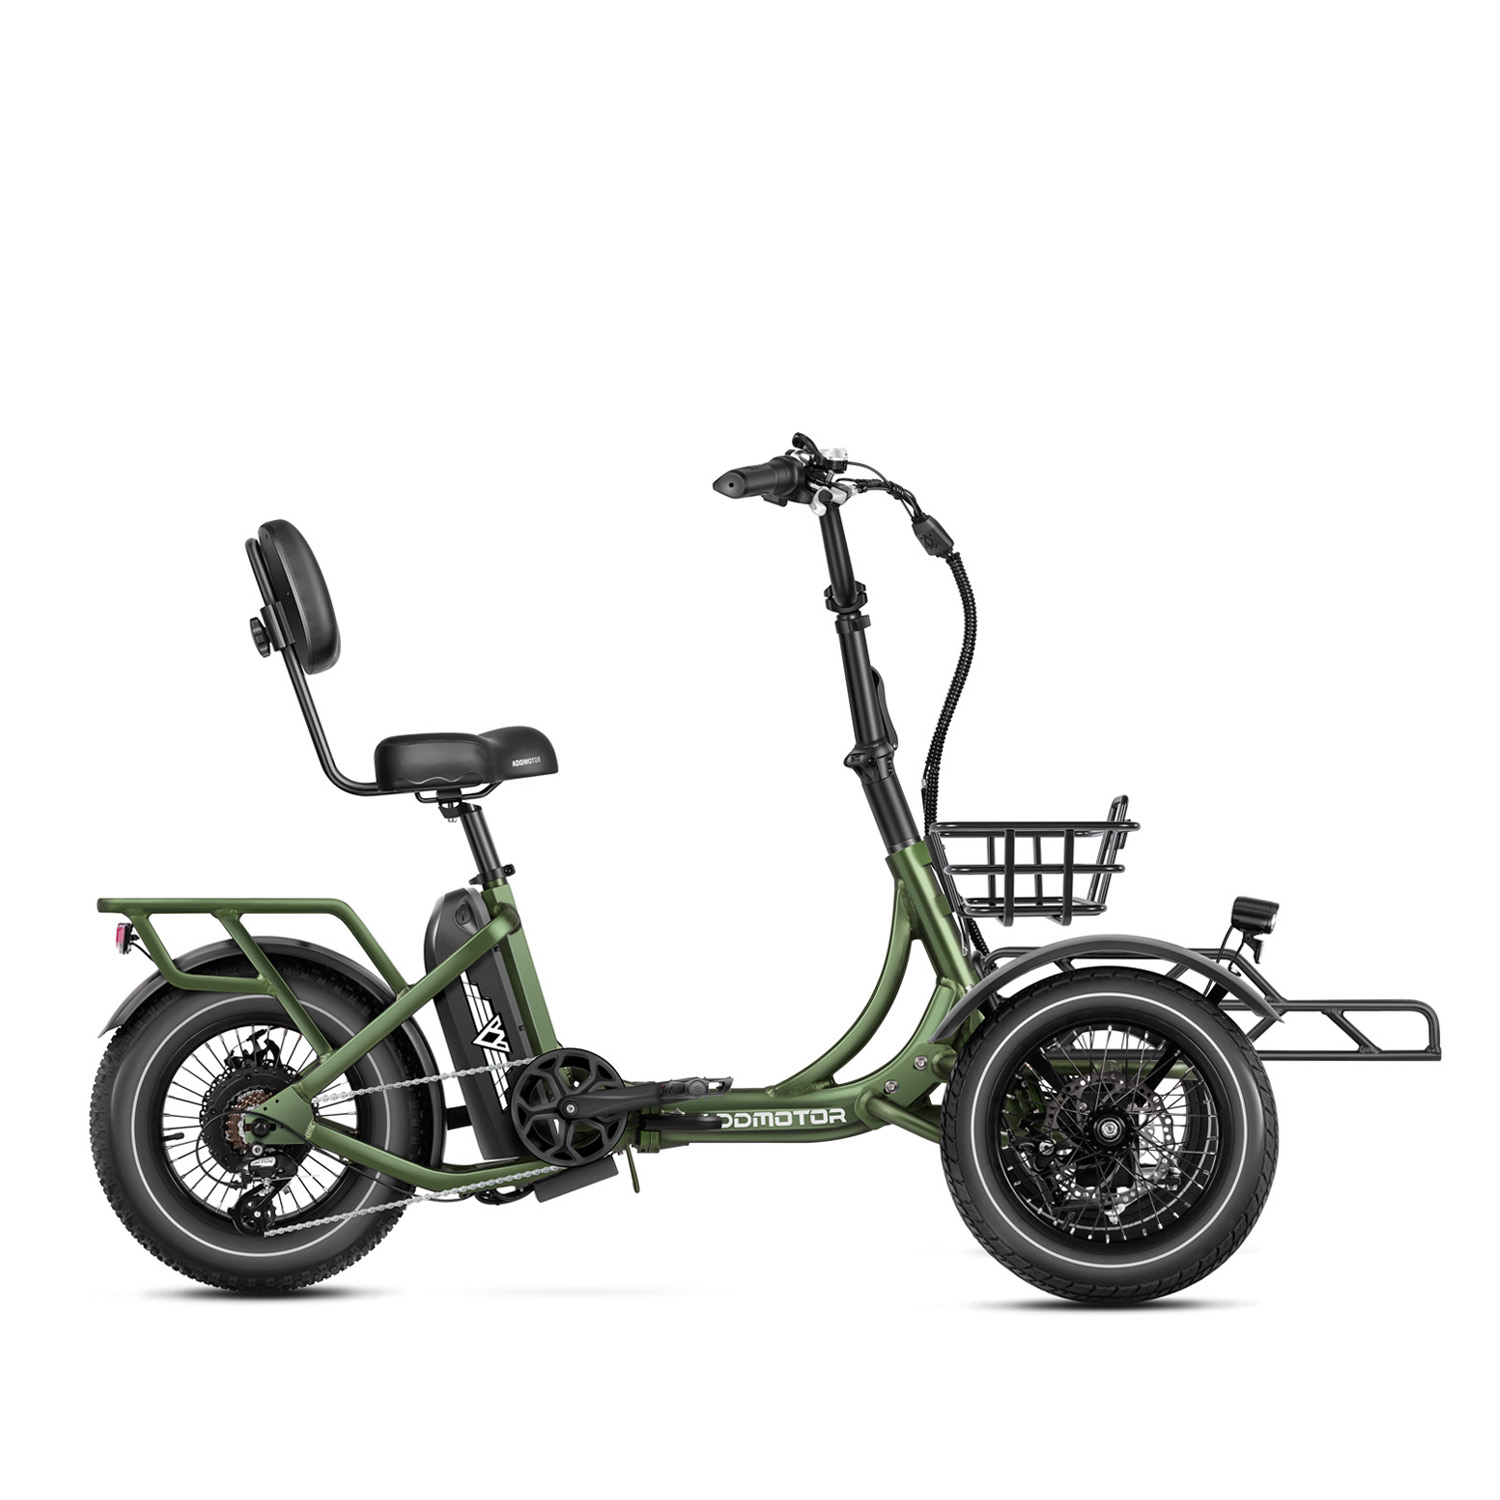 Addmotor Spytan Reverse Electric Trike | 2 Front Wheel 750W Rear Motor Electric Tricycle | 48V UL-certified battery | Olive Green